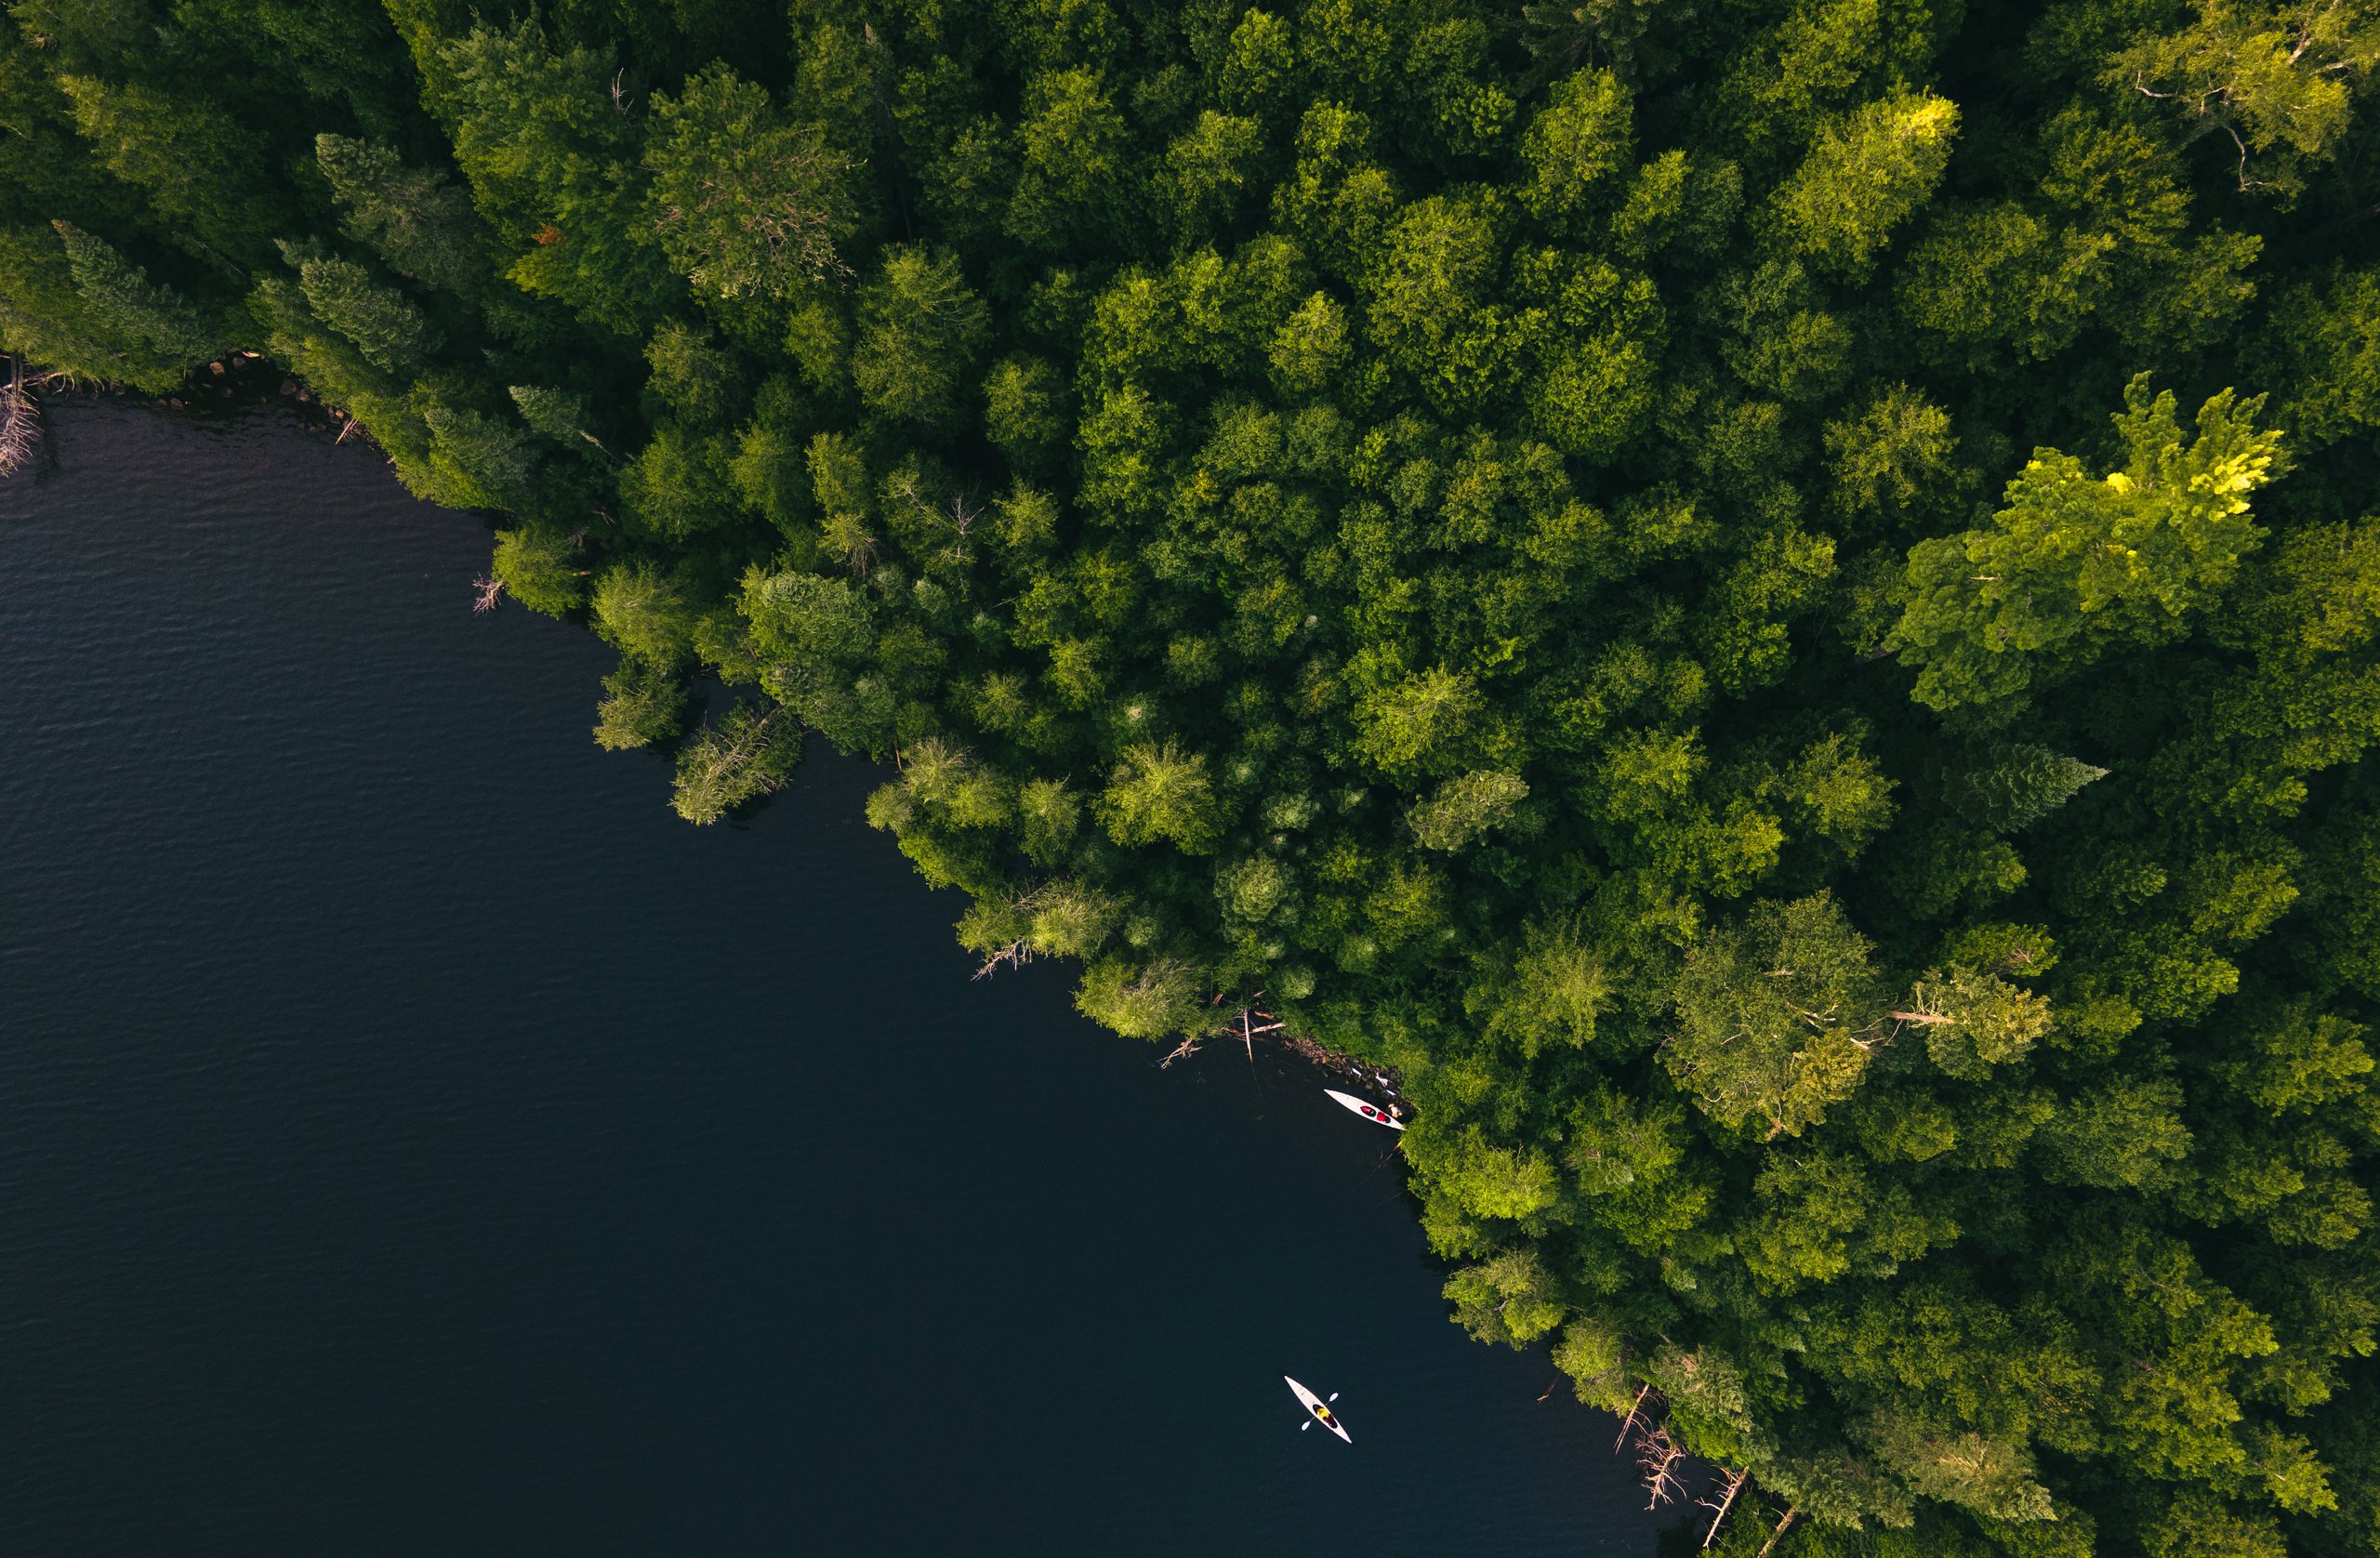 A tranquil aerial view of a lush deciduous forest surrounded by calm waters